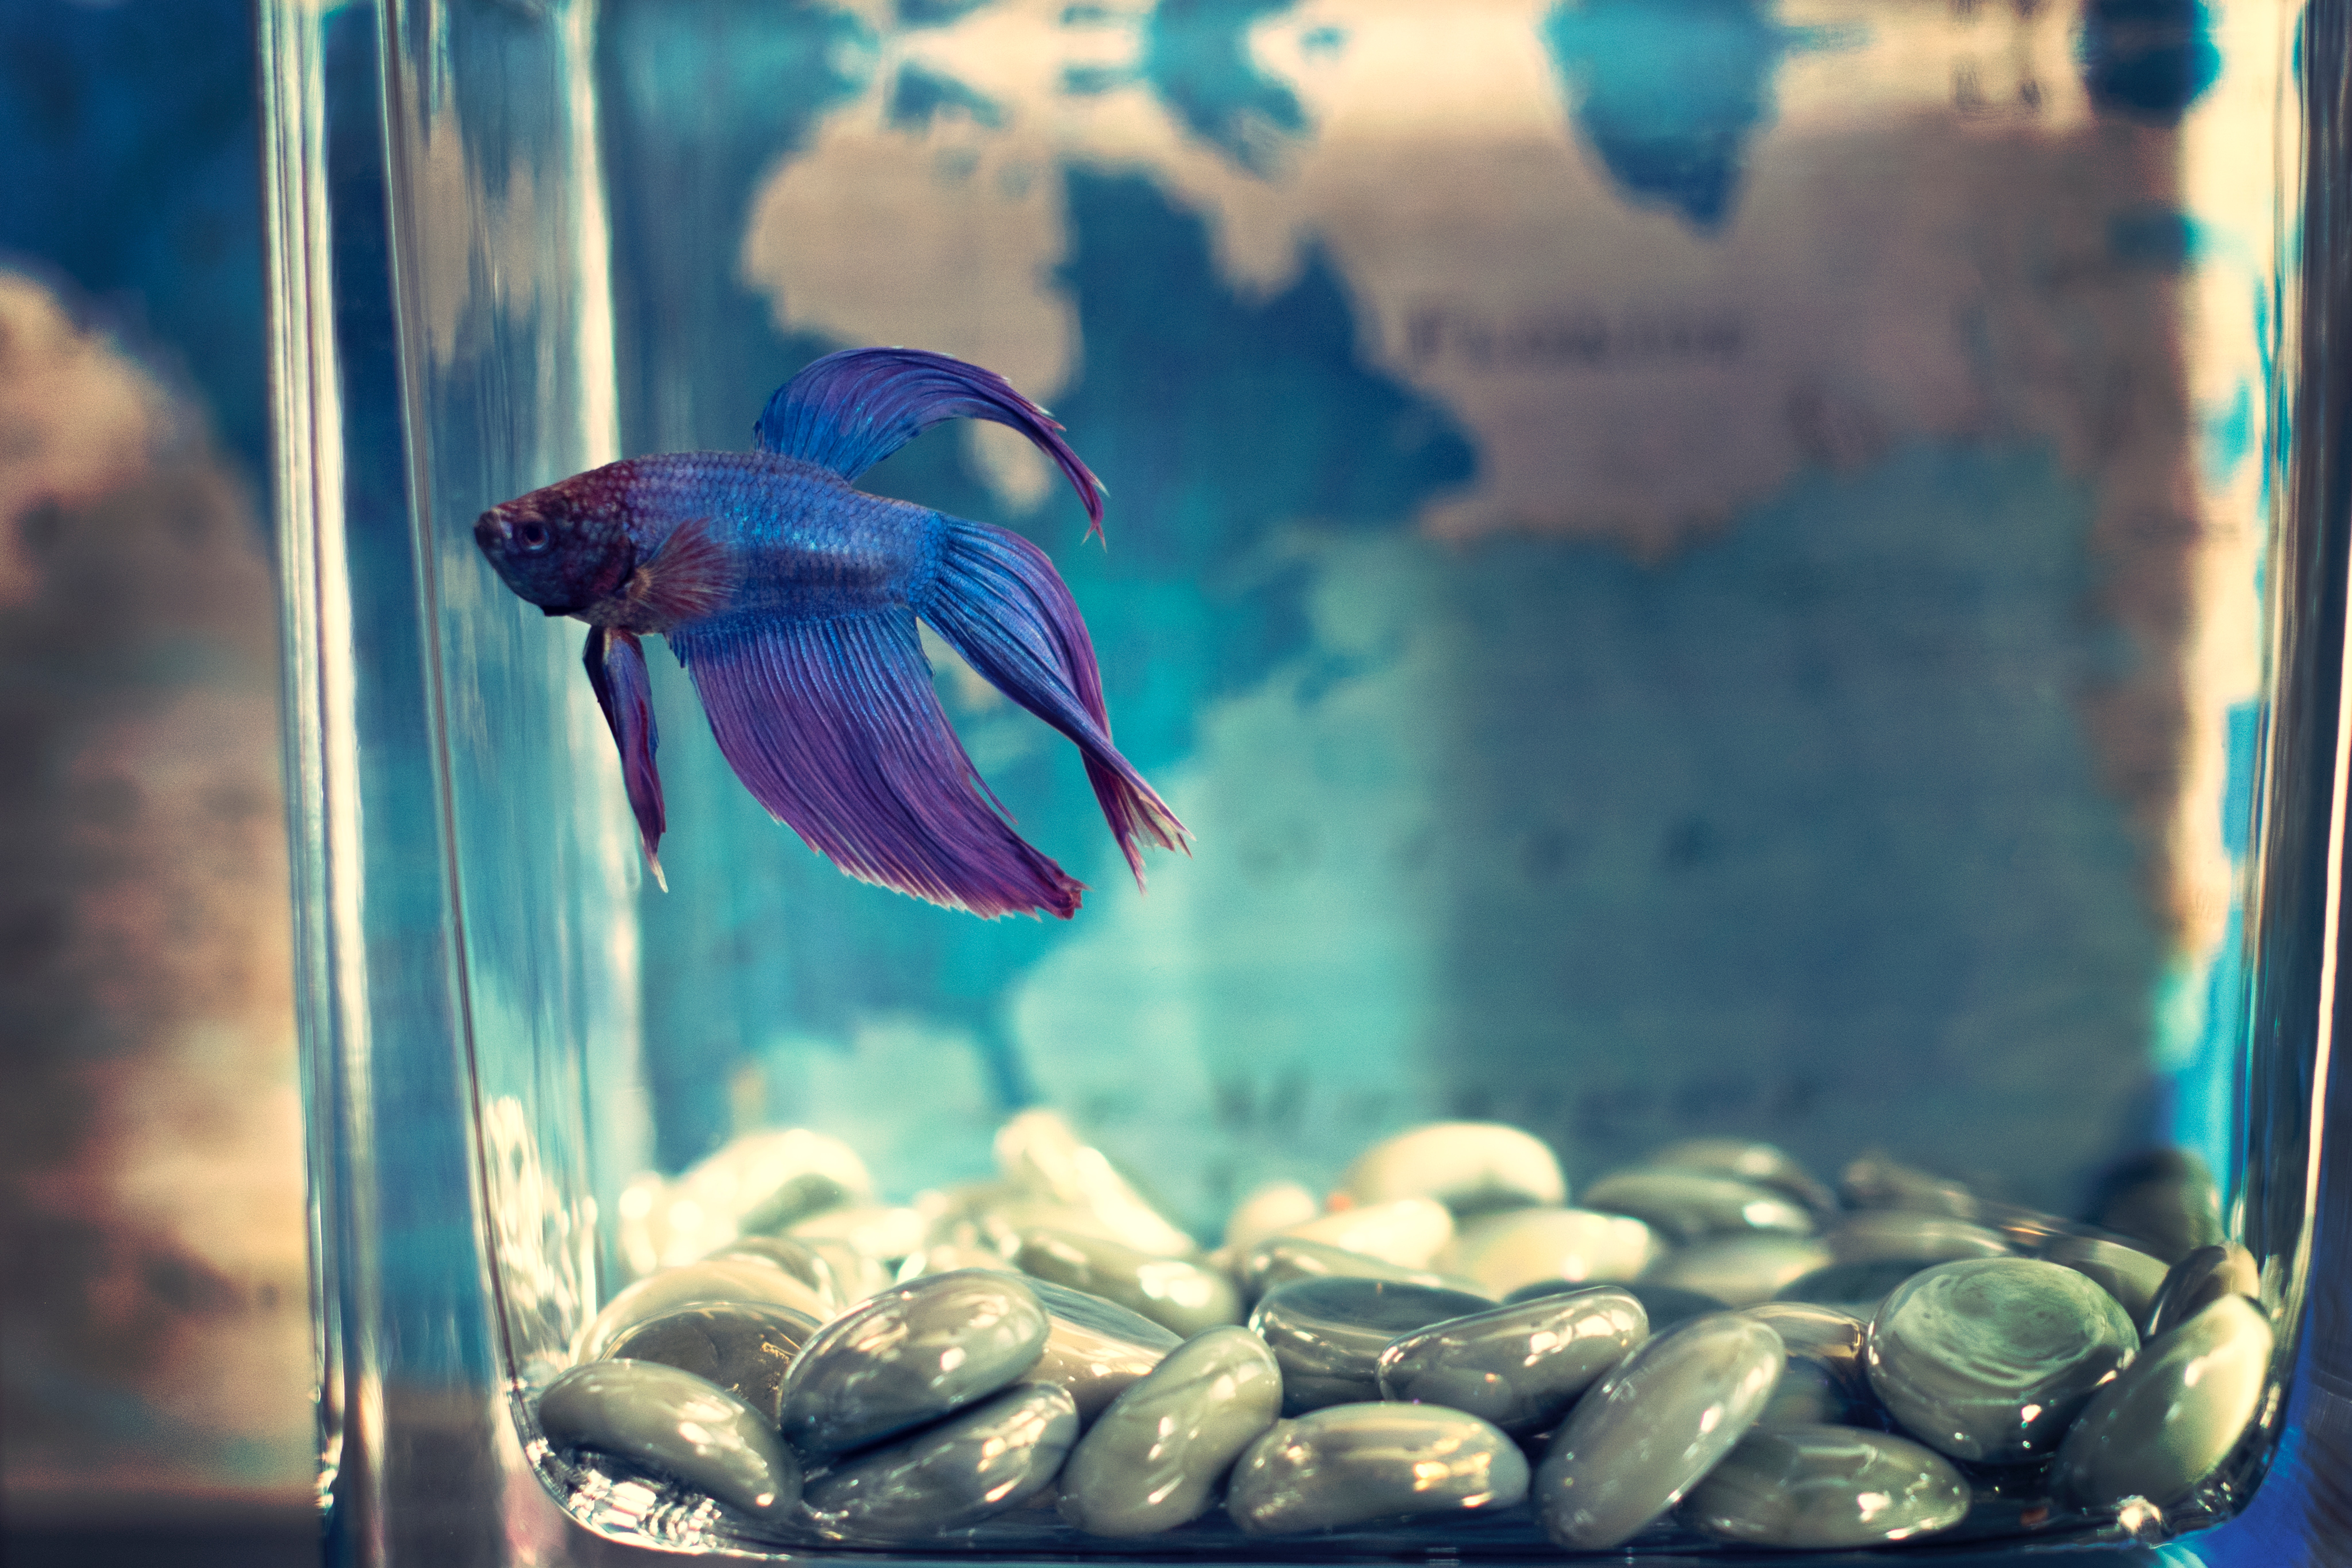 How Long Can a Betta Fish Go Without Eating?